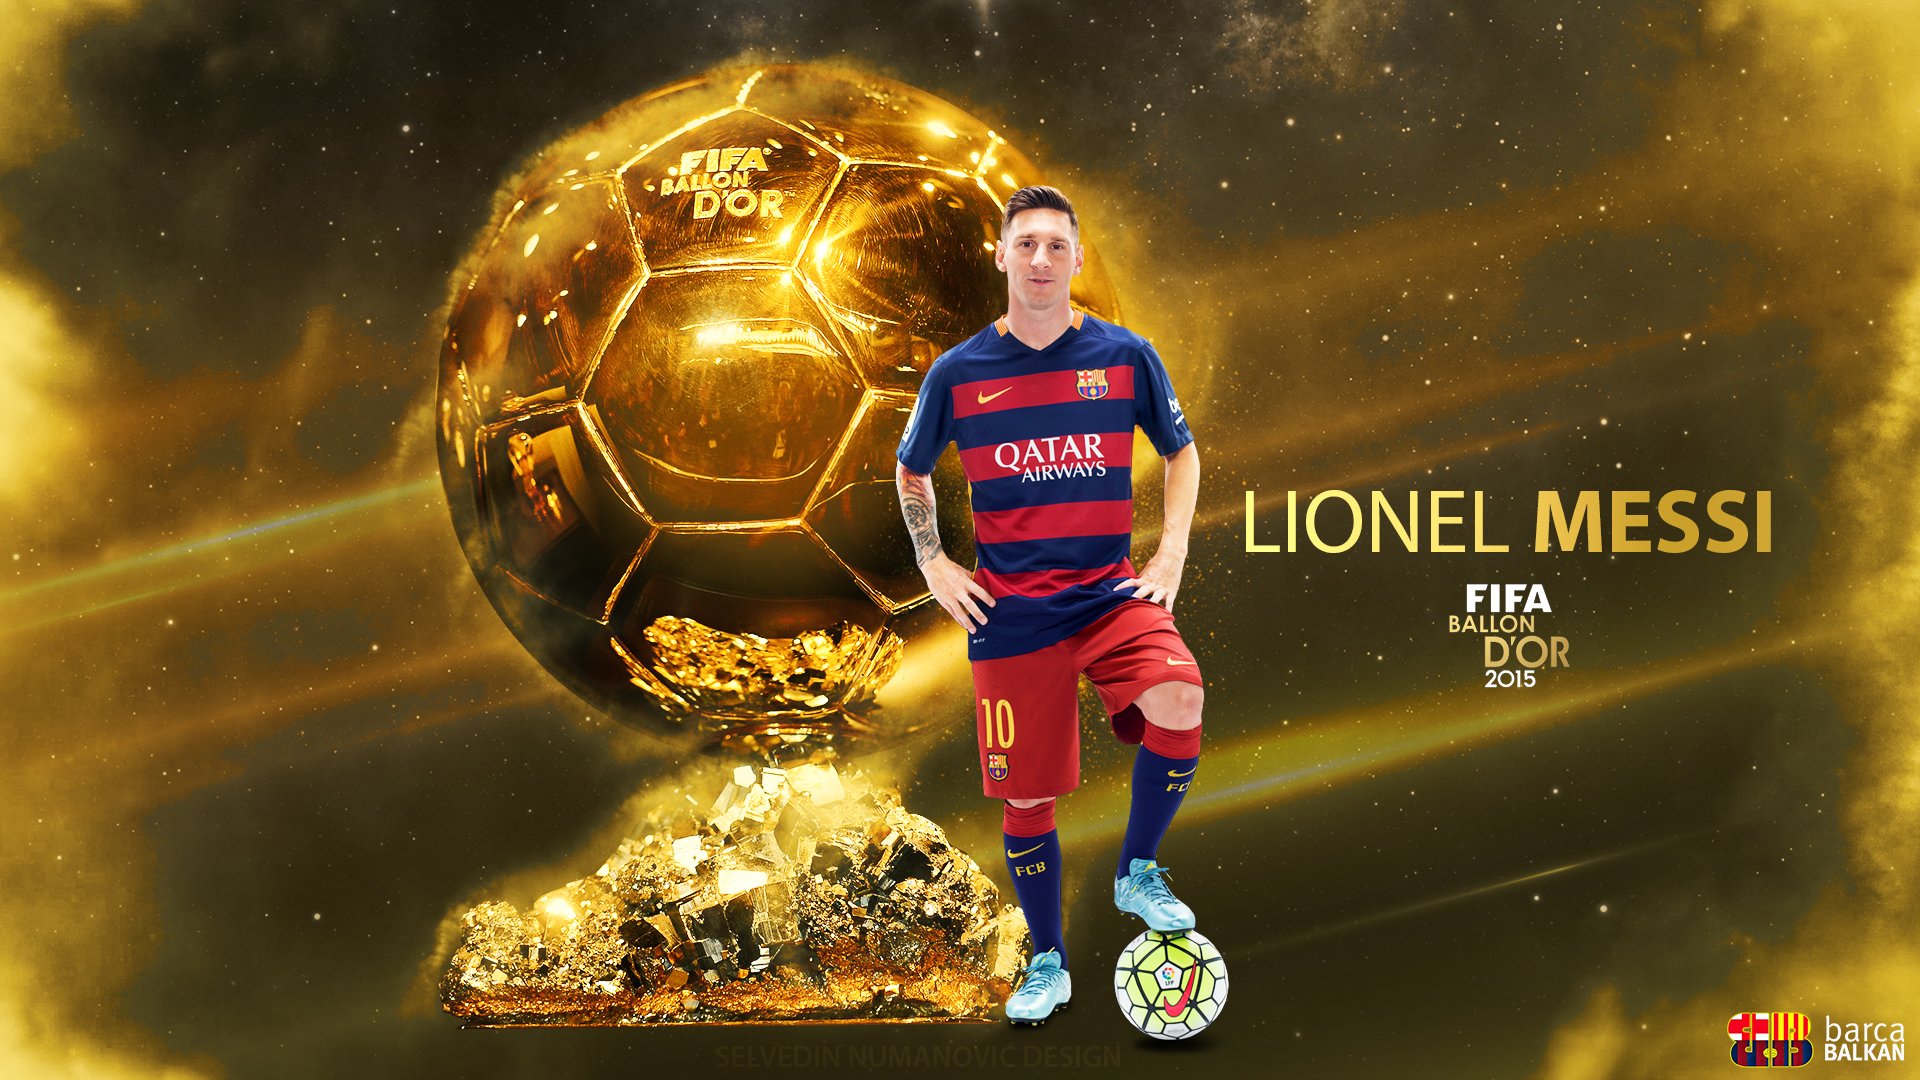 Lionel Messi Fifa Ballon D Or HD Wallpaper By Selvedinfcb On